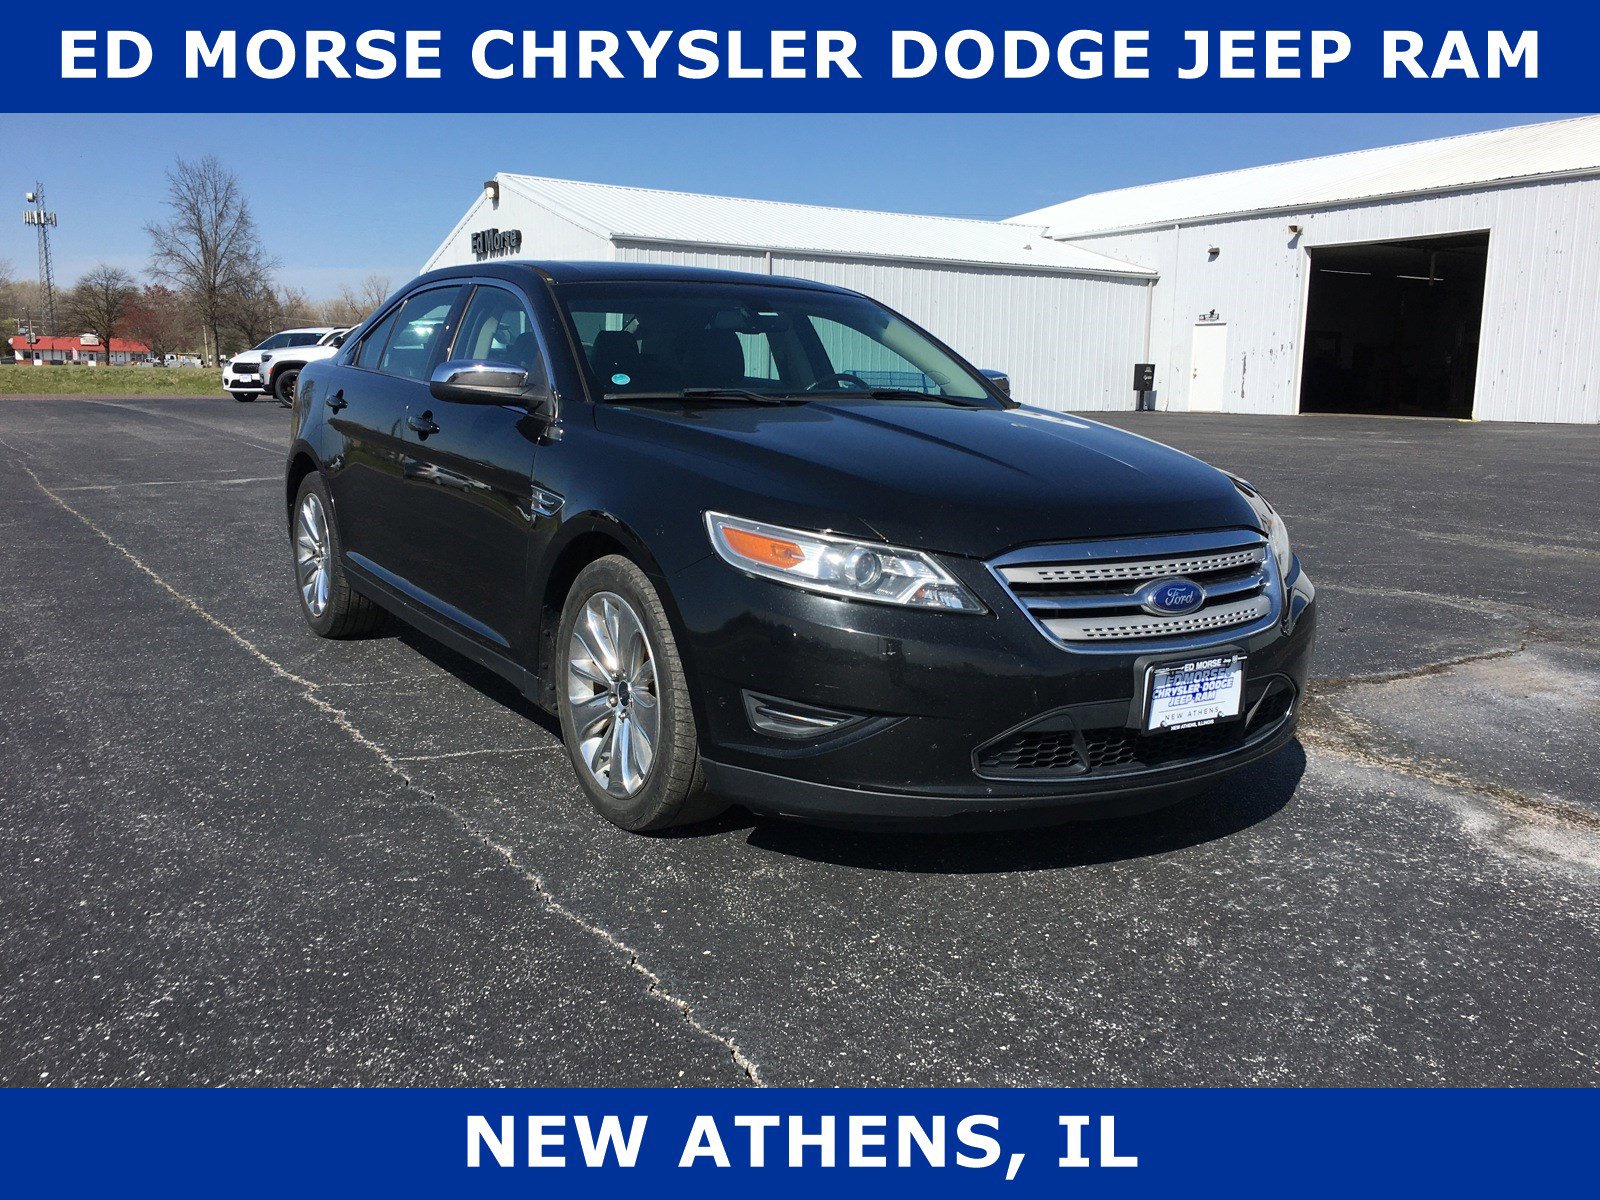 2012 Ford Taurus New Athens IL